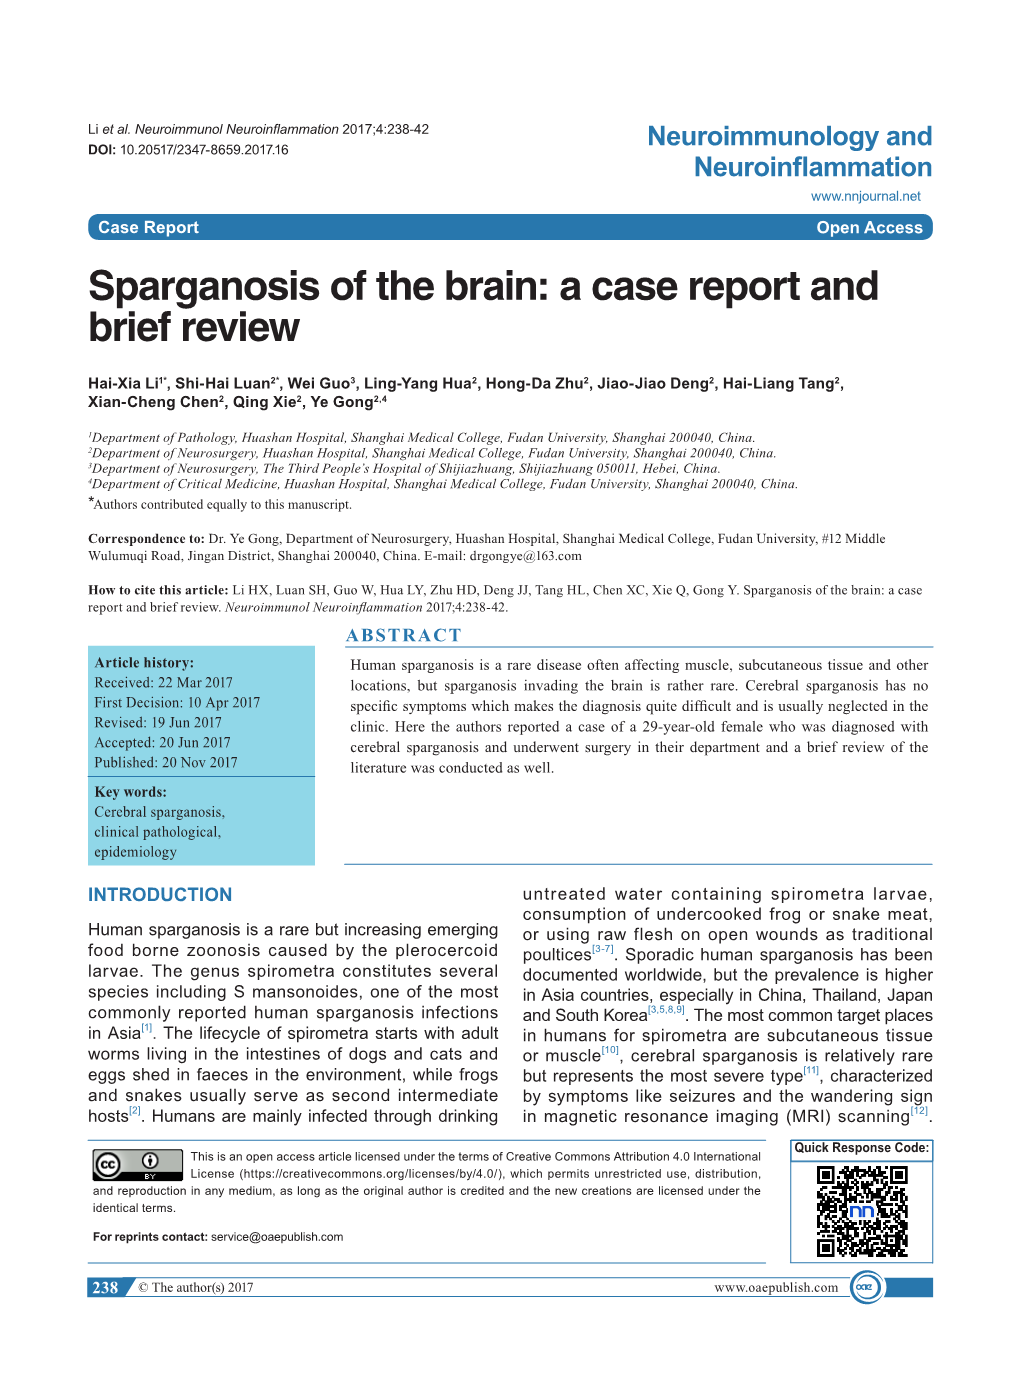 Sparganosis of the Brain: a Case Report and Brief Review